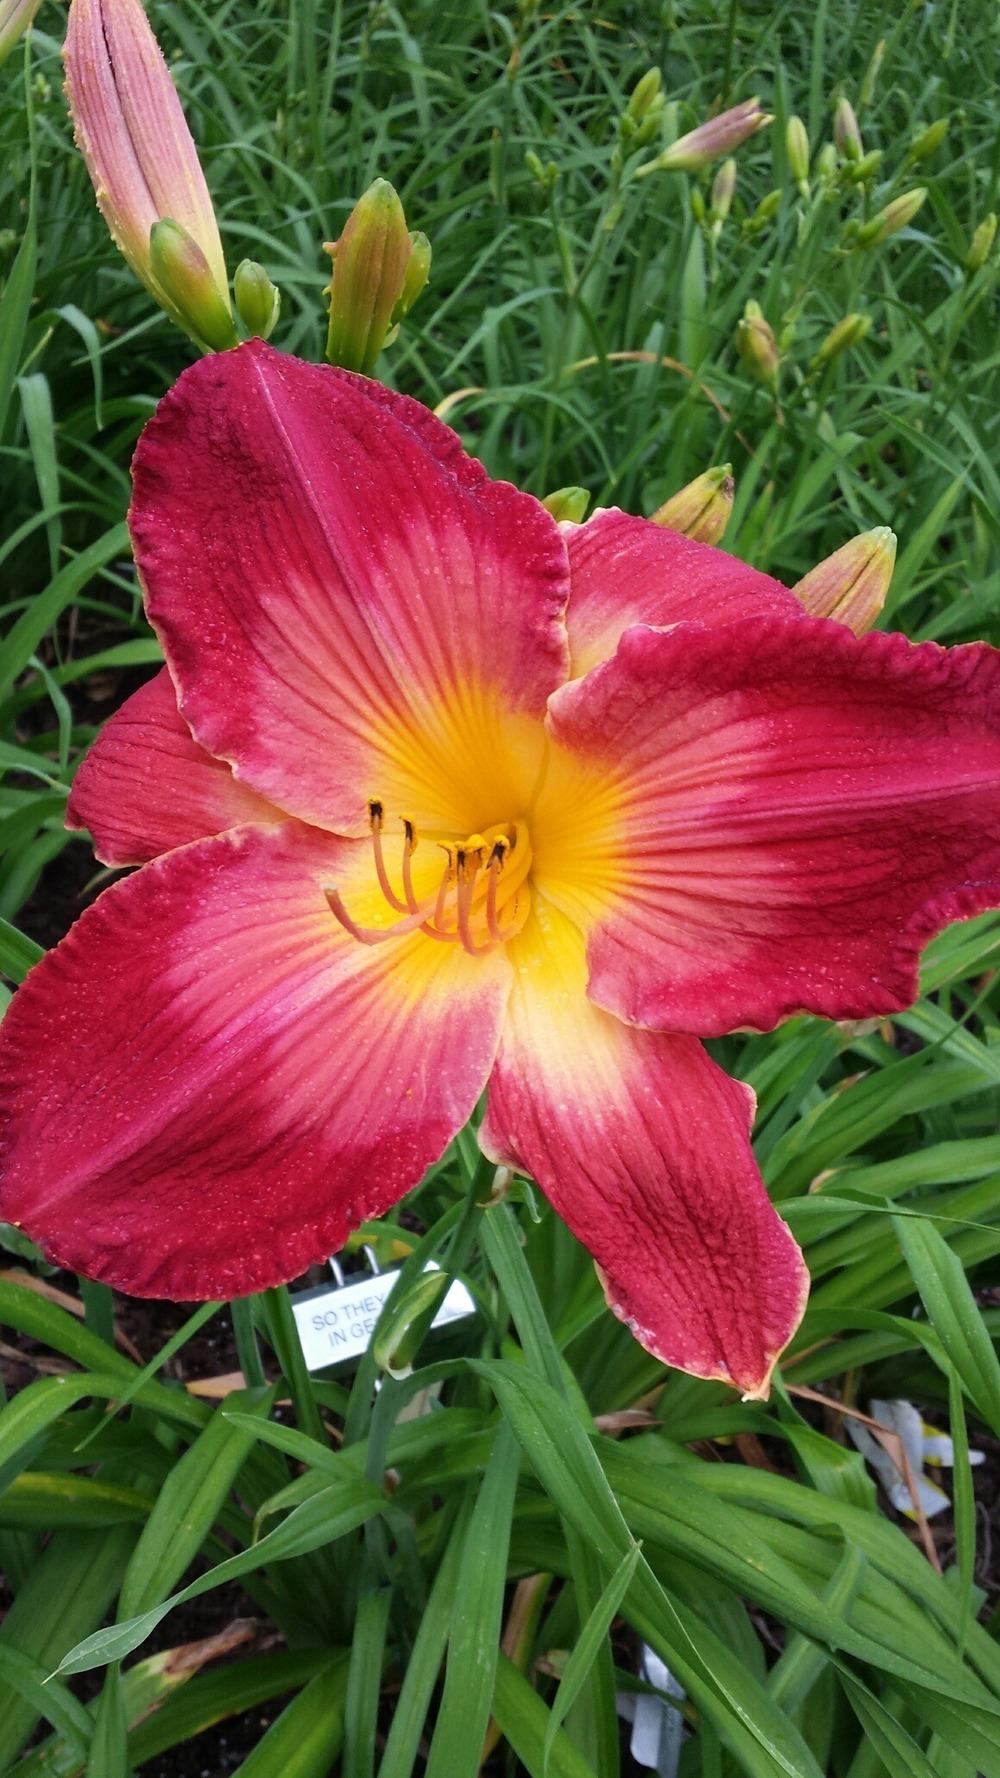 Photo of Daylily (Hemerocallis 'So They Met in Georgia') uploaded by Ahead